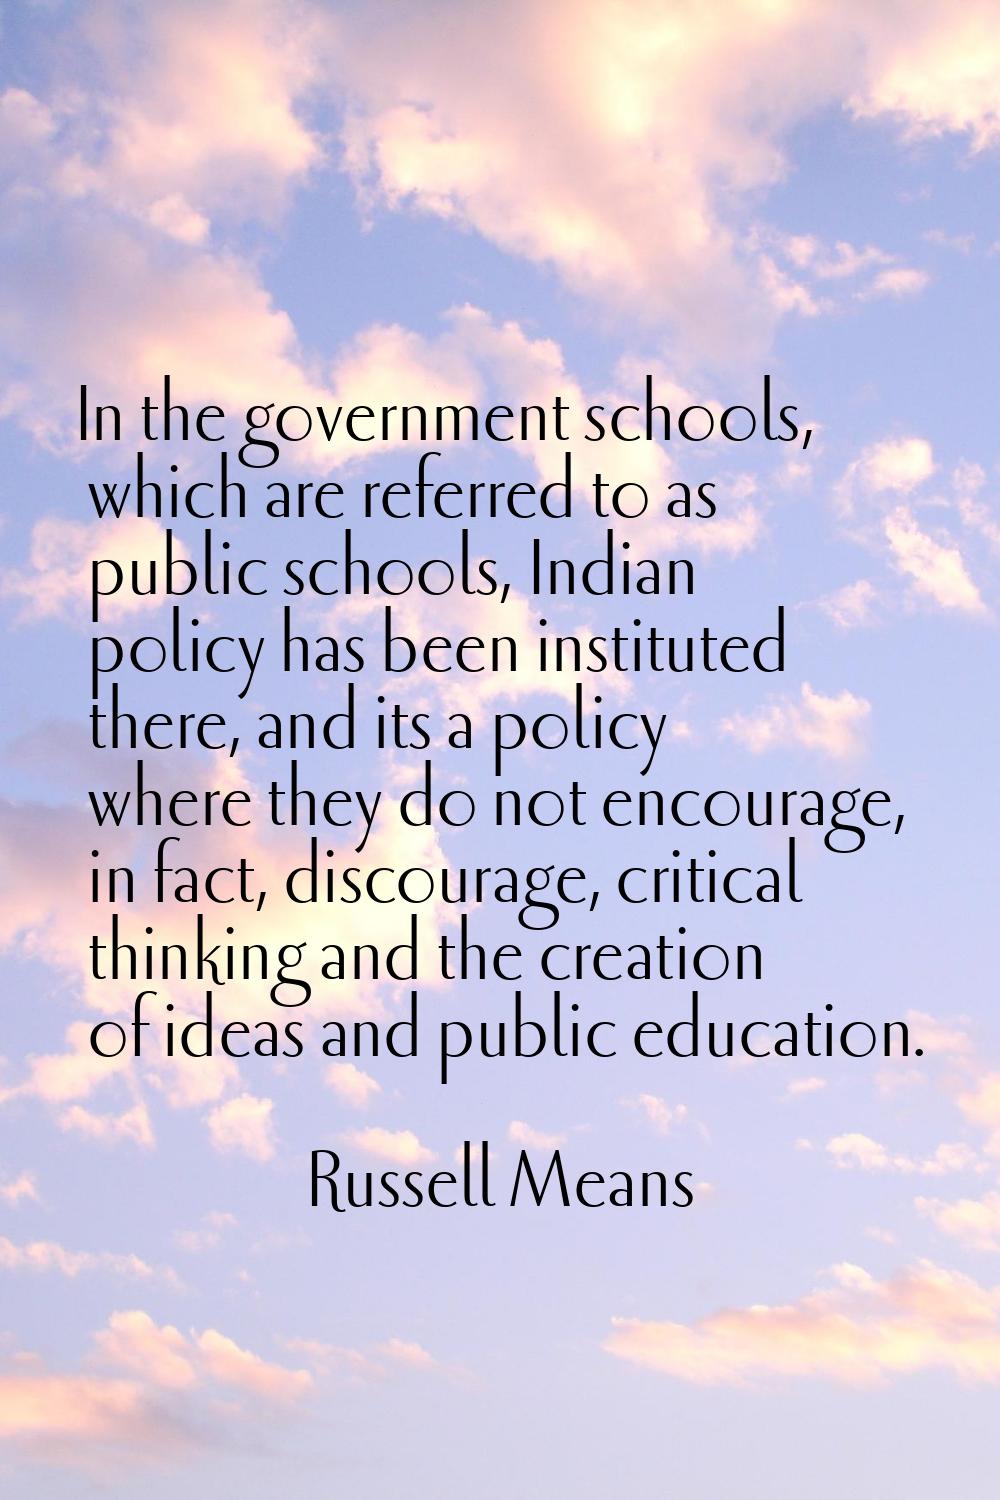 In the government schools, which are referred to as public schools, Indian policy has been institut